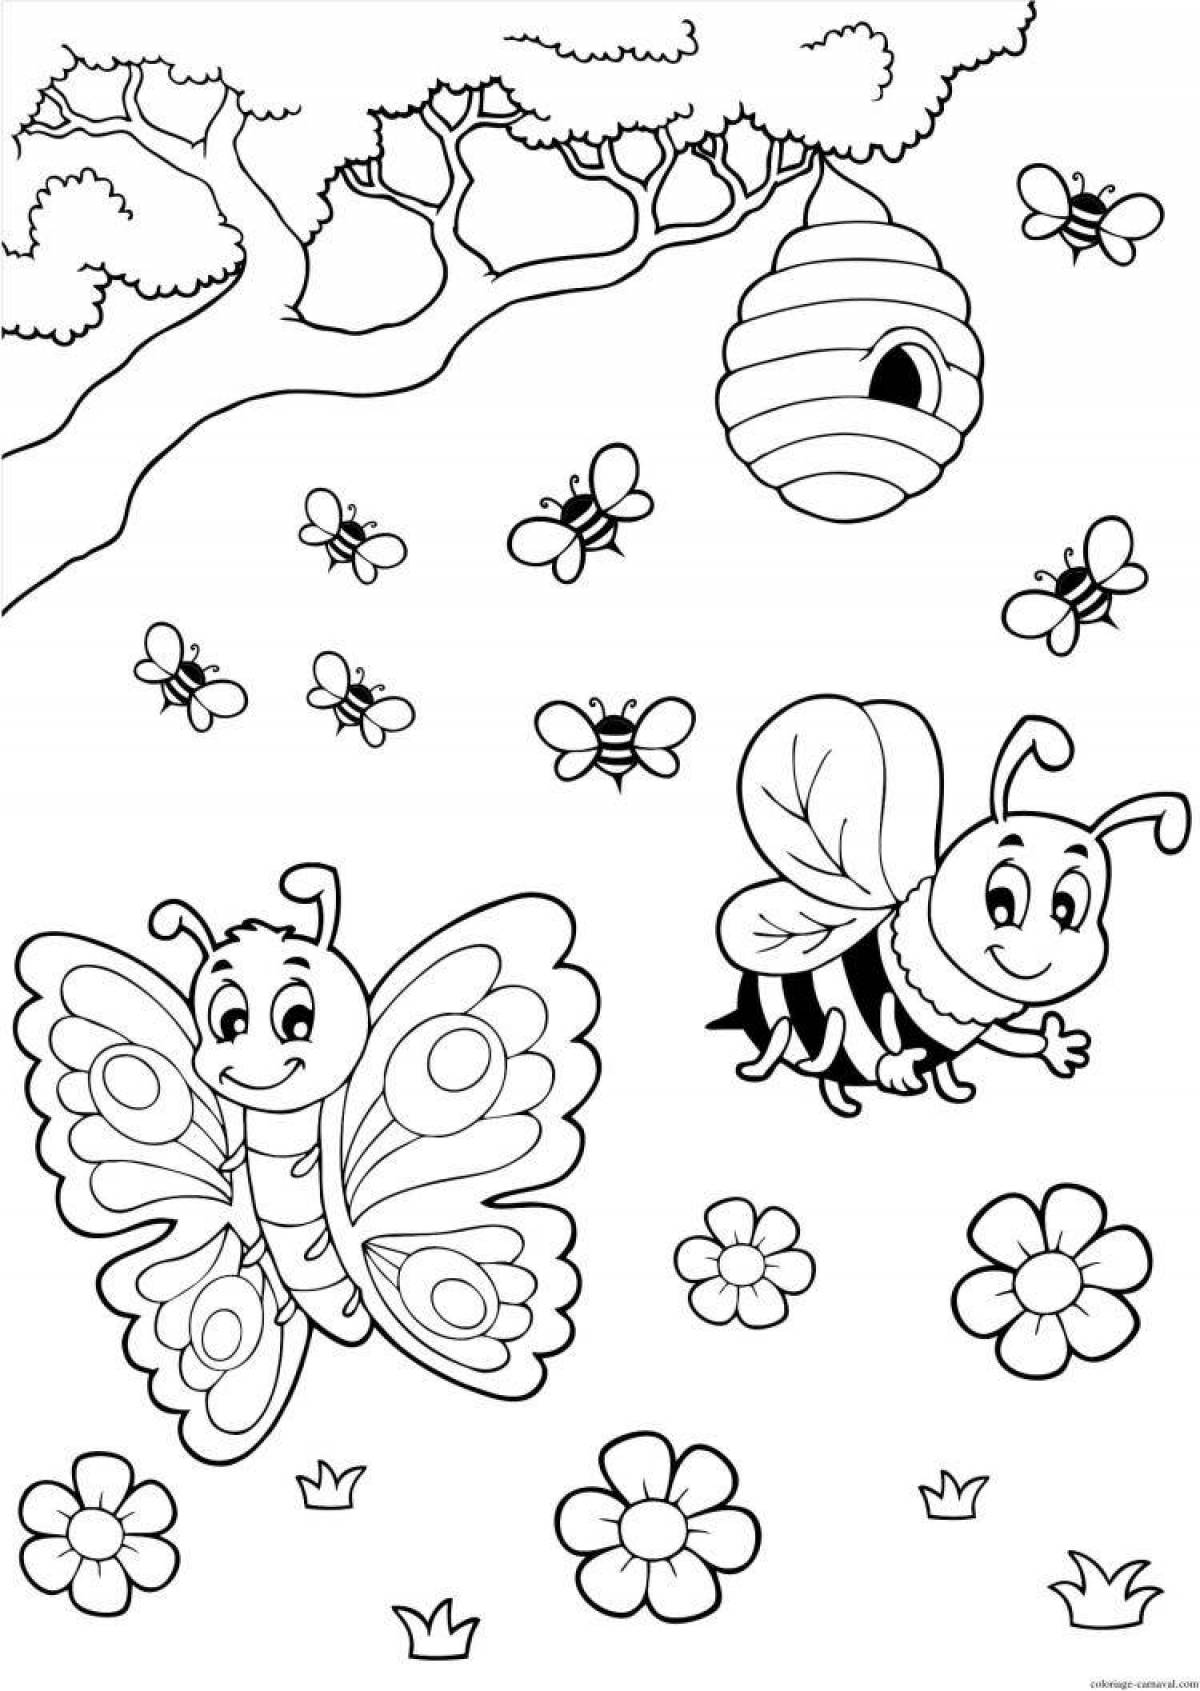 Insects for children 5 6 years old #14